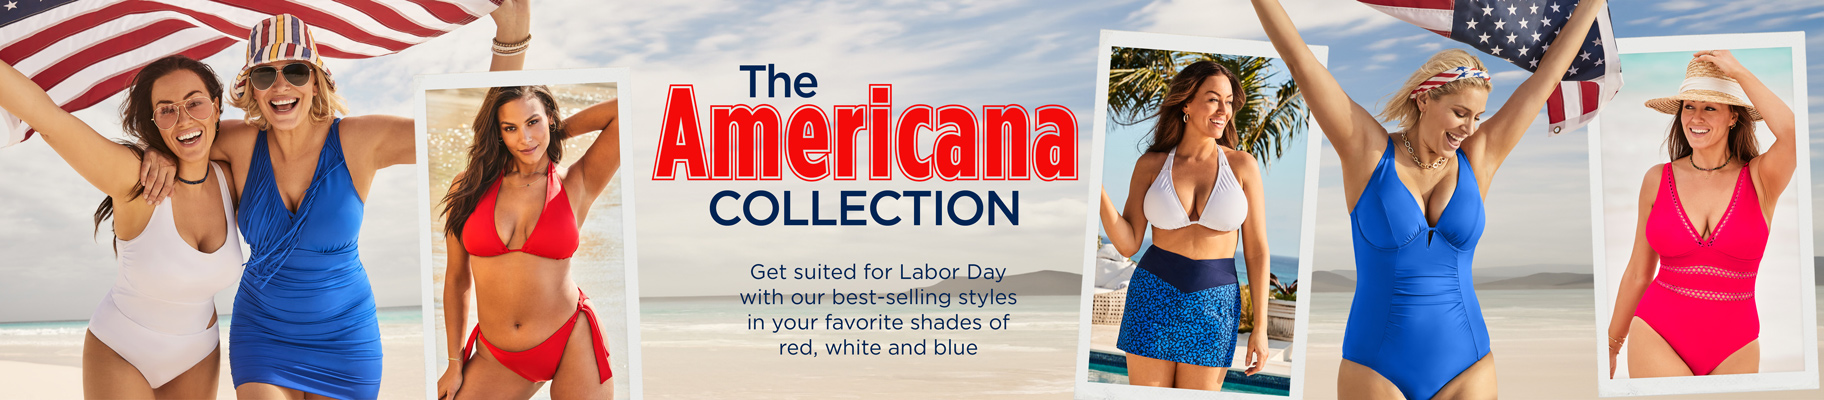 Shop The Americana Collection: Get suited for Labor Day with our best-selling styles in your favorite shades of red, white and blue